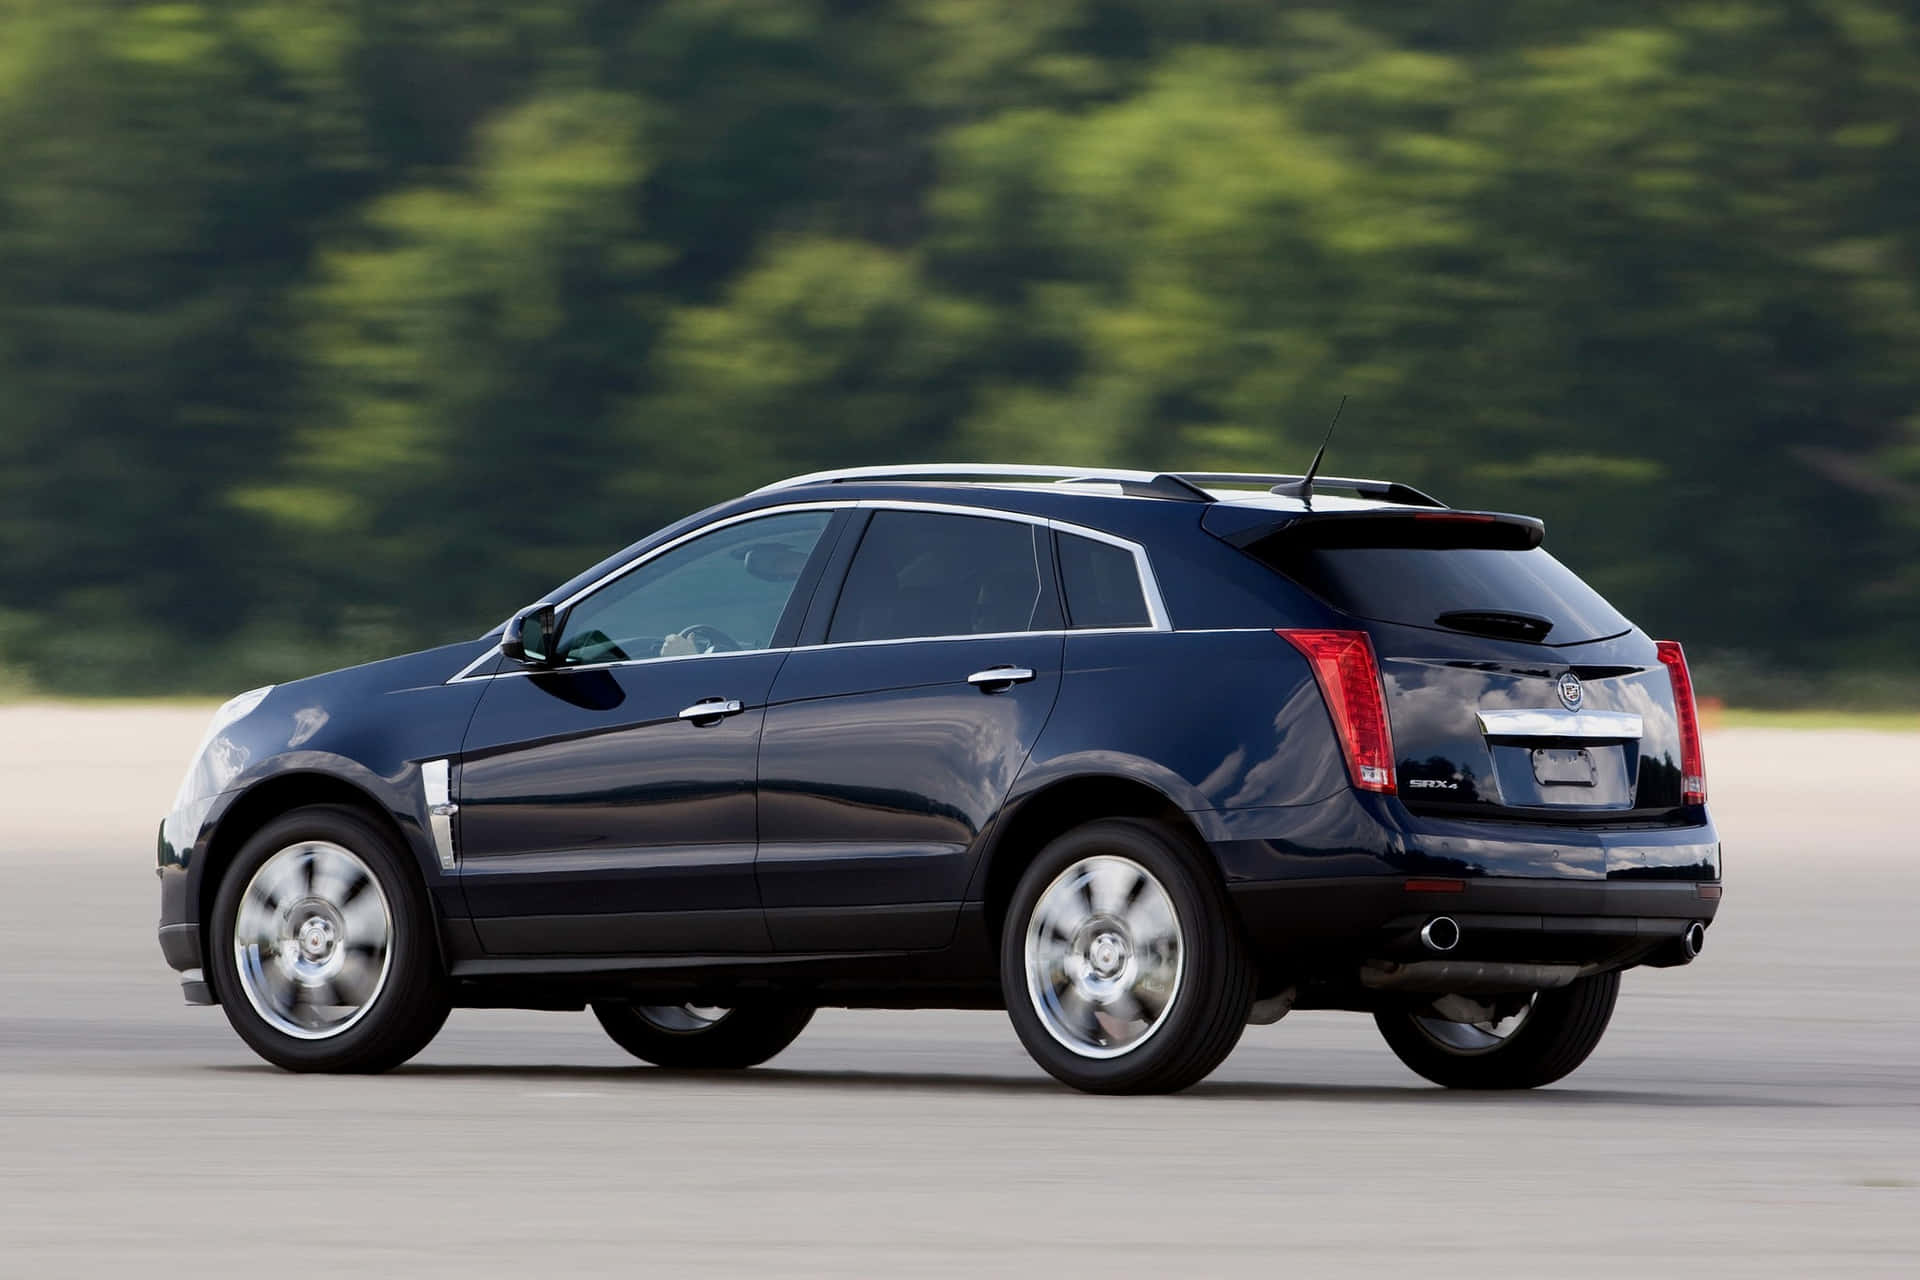 Sleek and Sophisticated Cadillac SRX on the Road Wallpaper